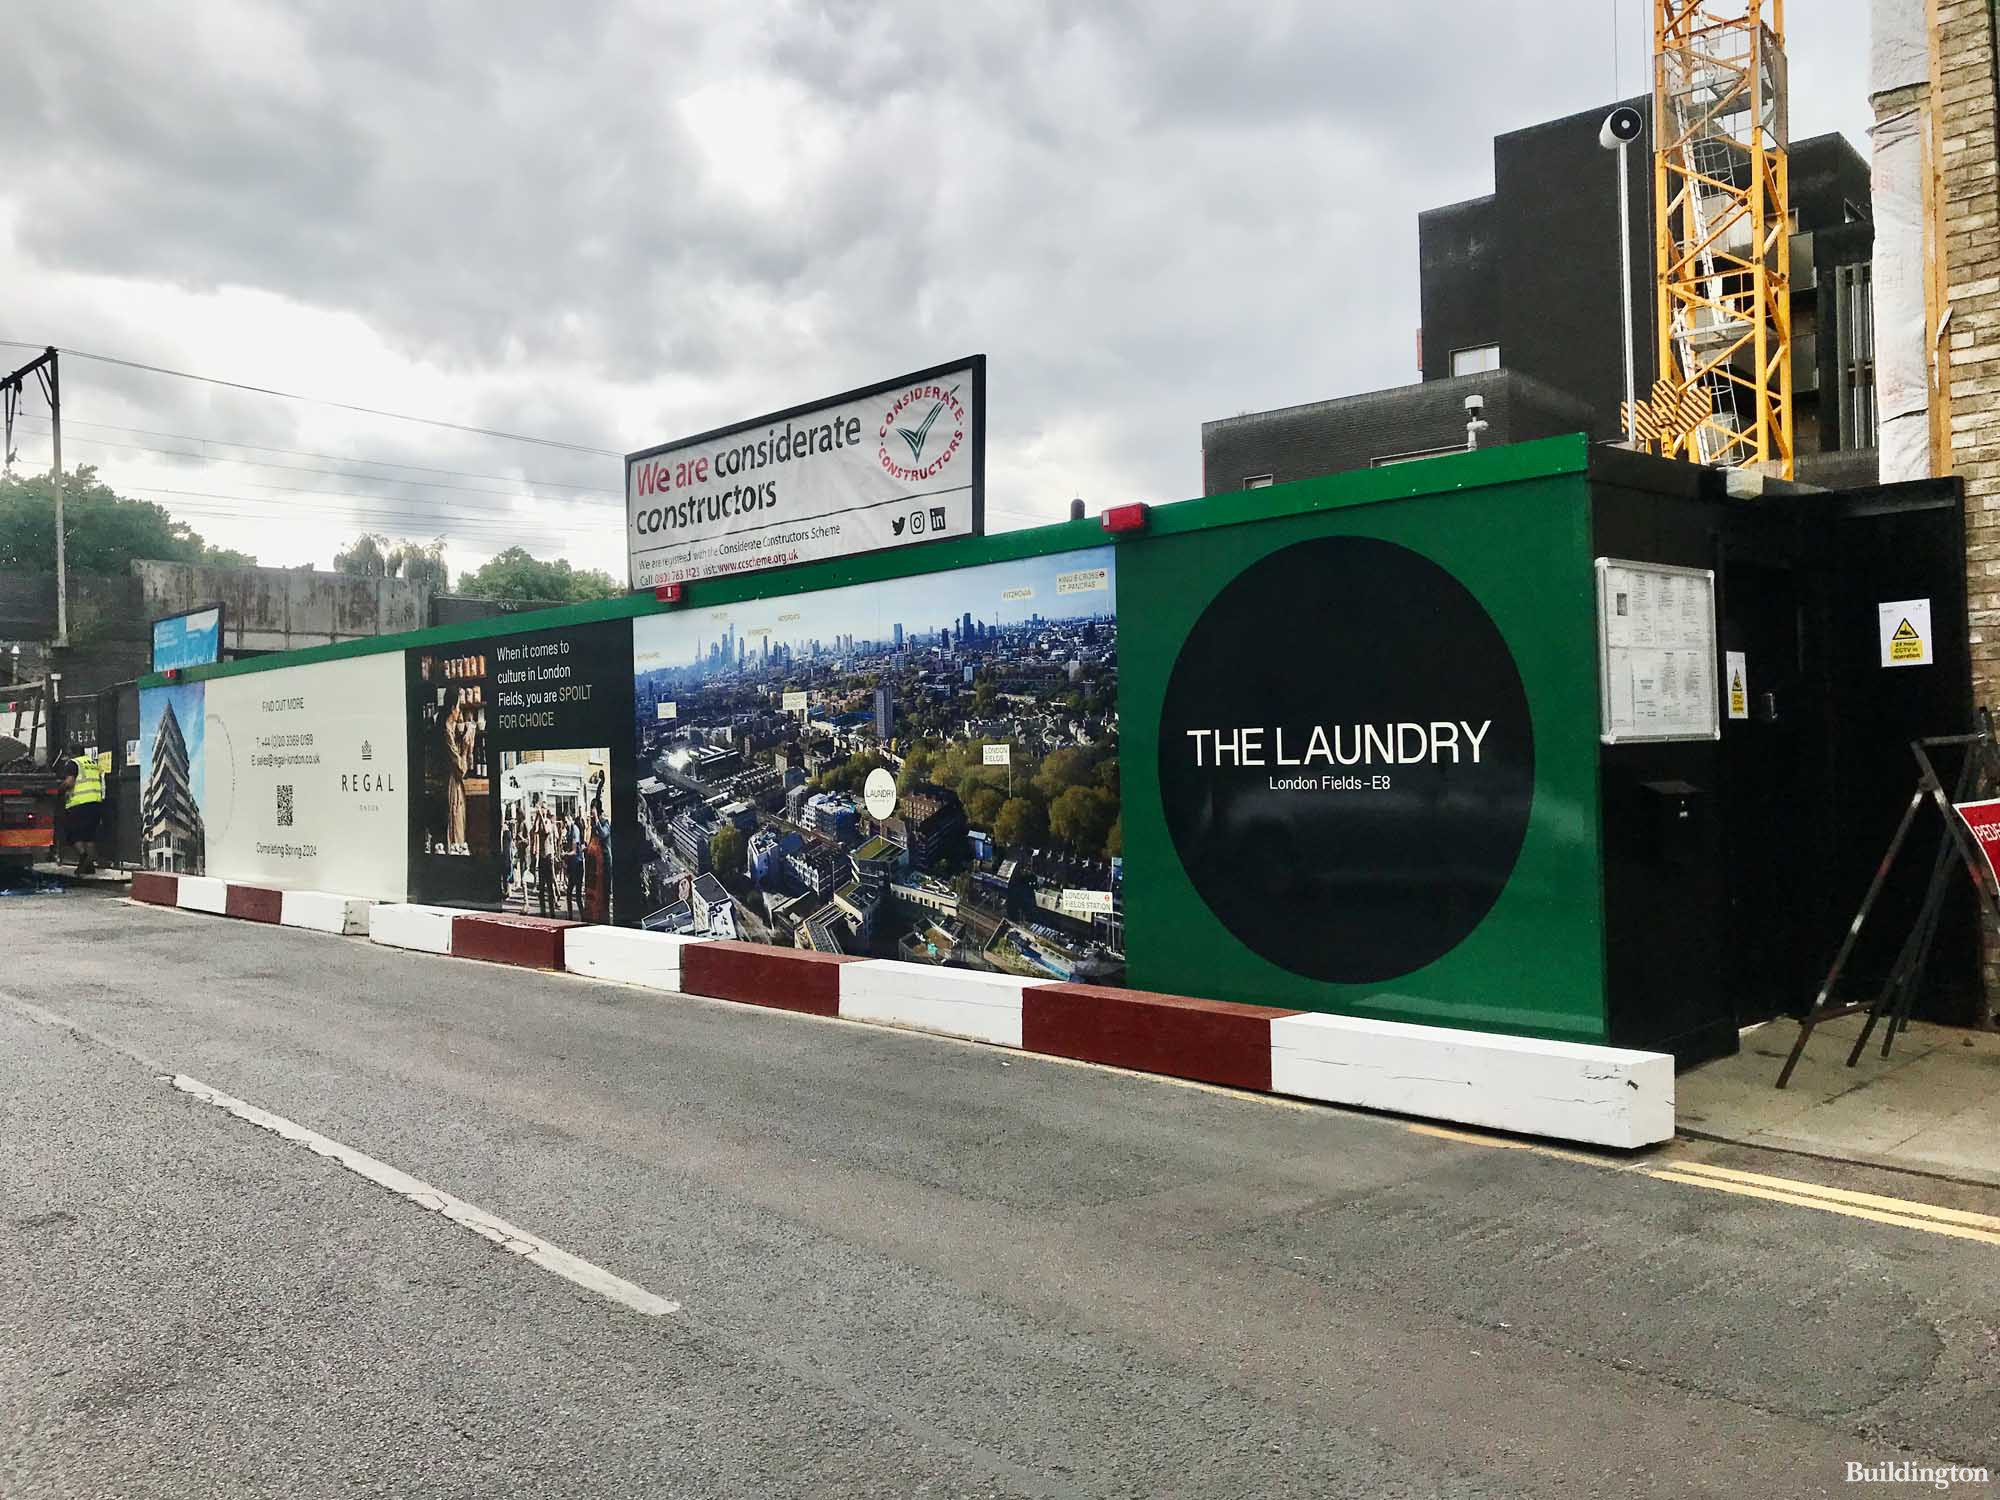 The Laundry development site in summer 2022.